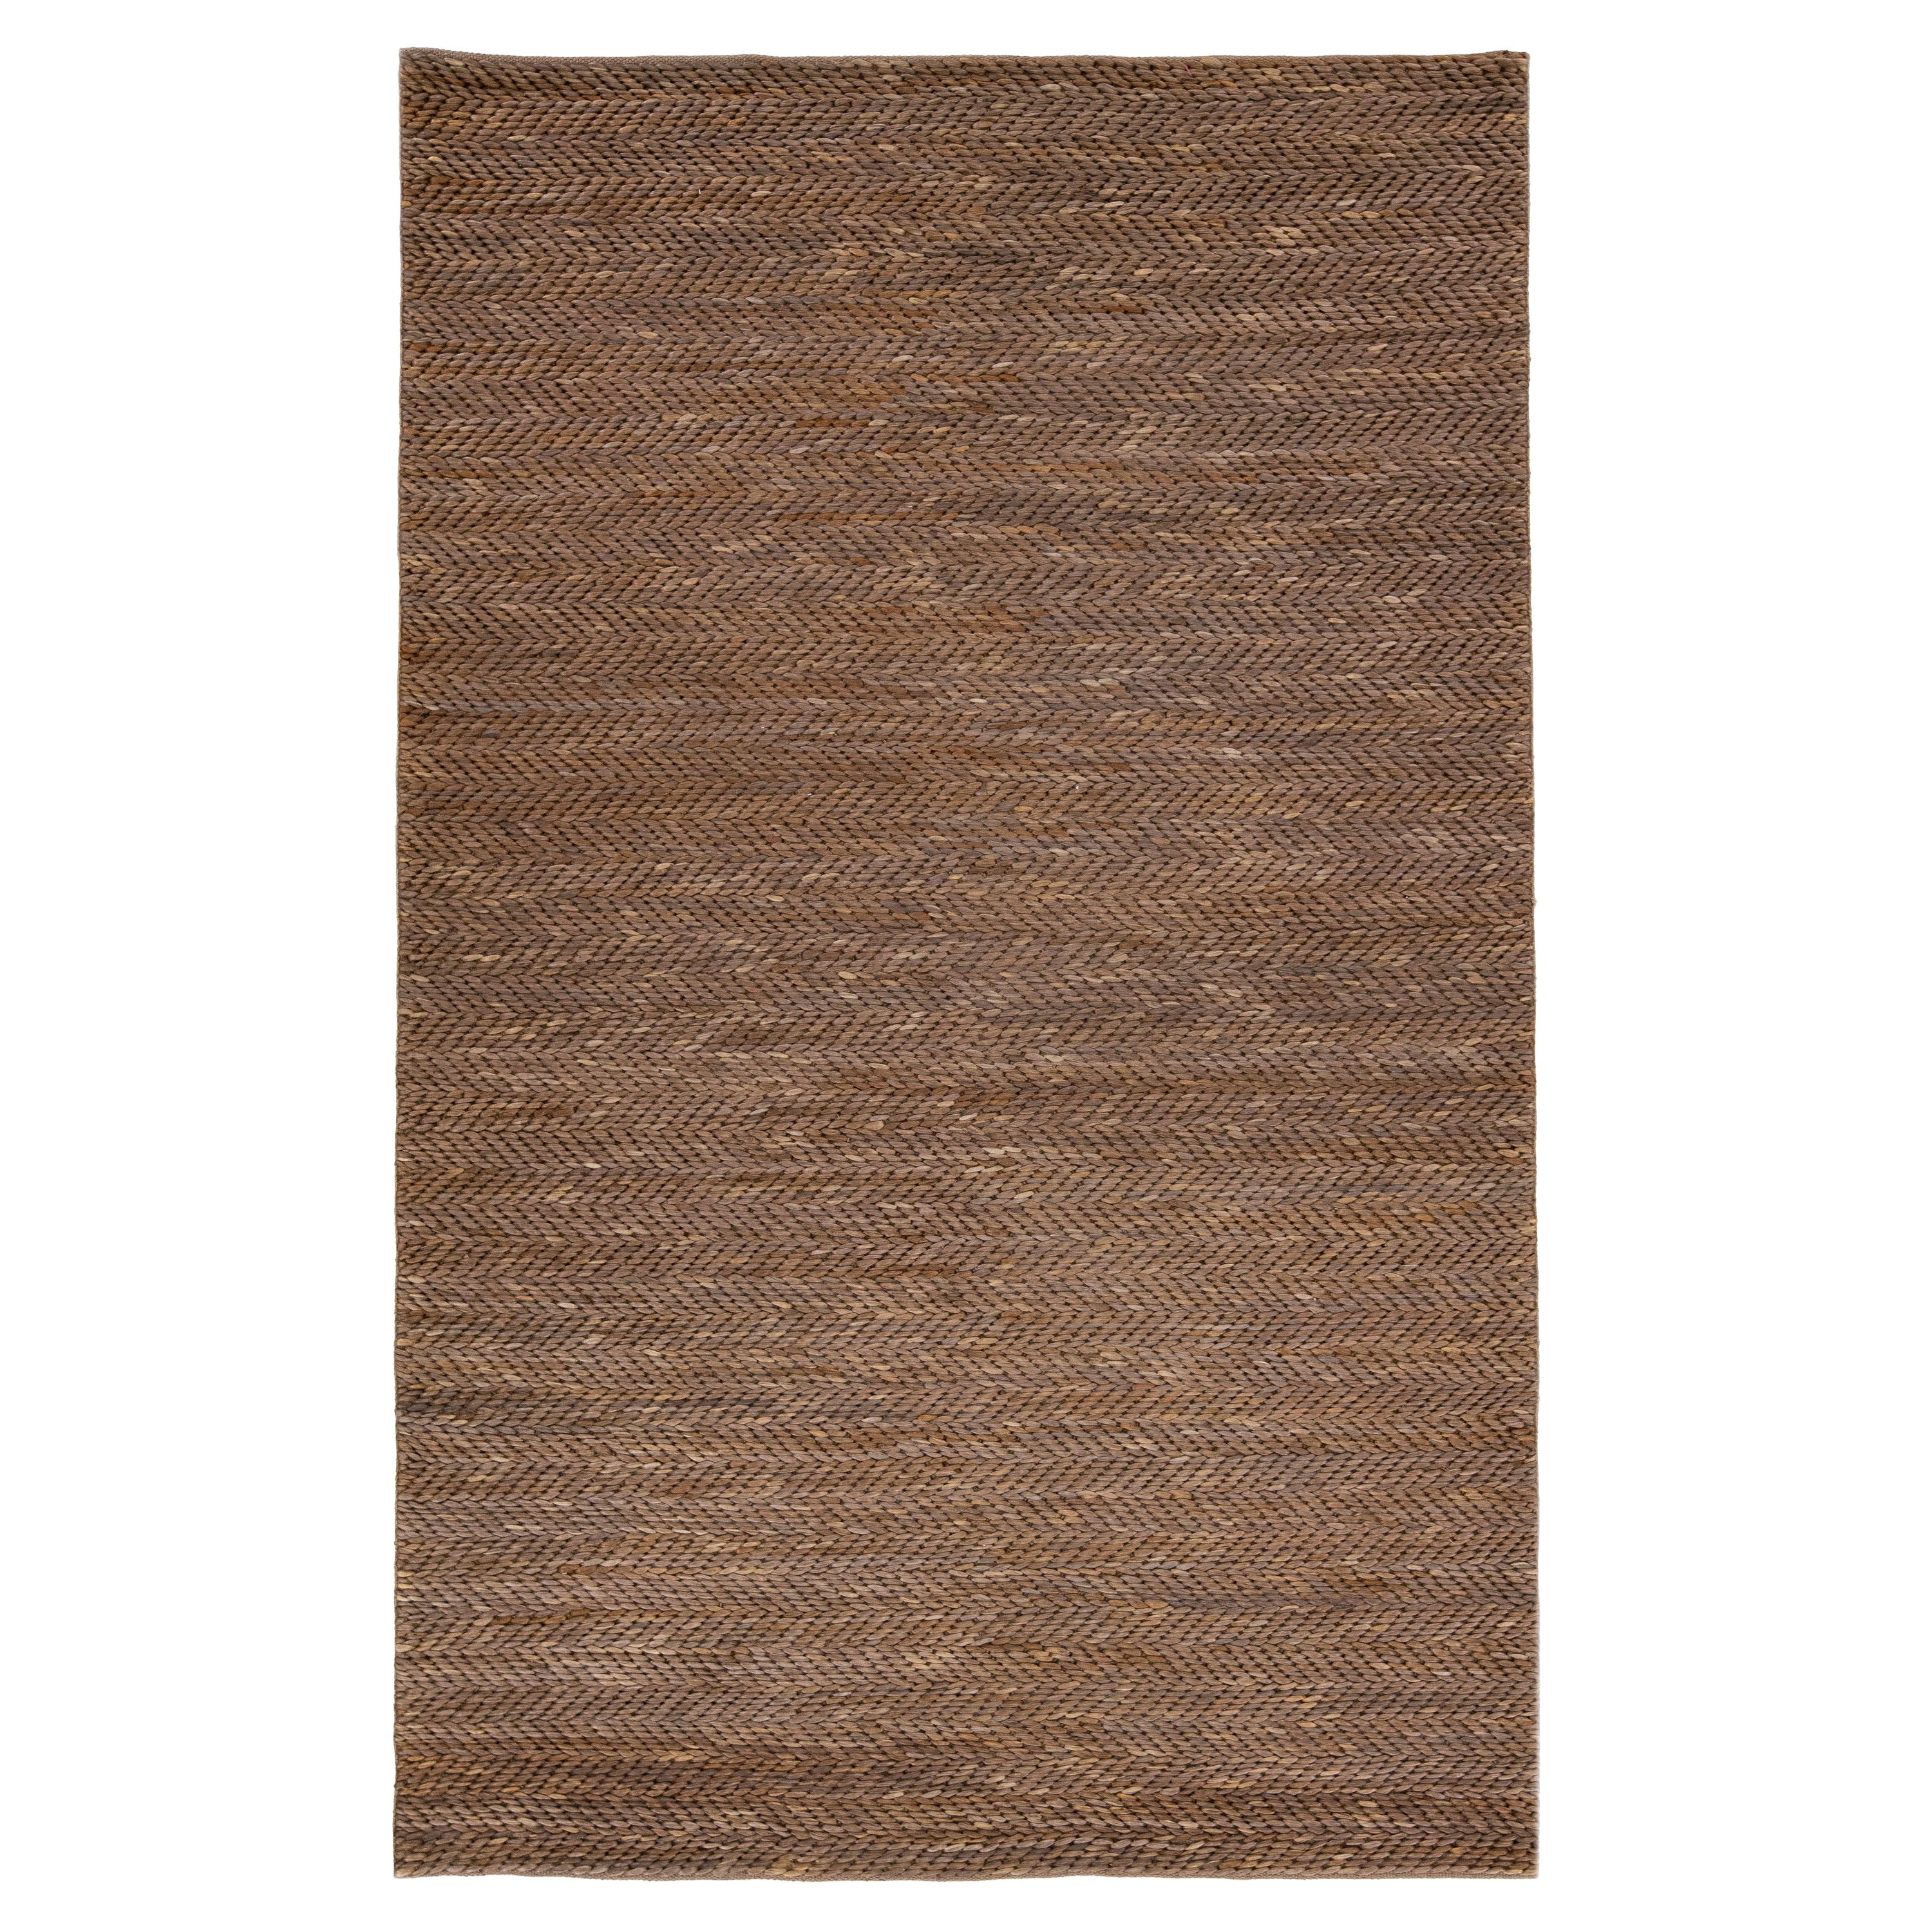 Modern Natural Texture Hand Woven Jute & Cotton Area Rug with Brown Color